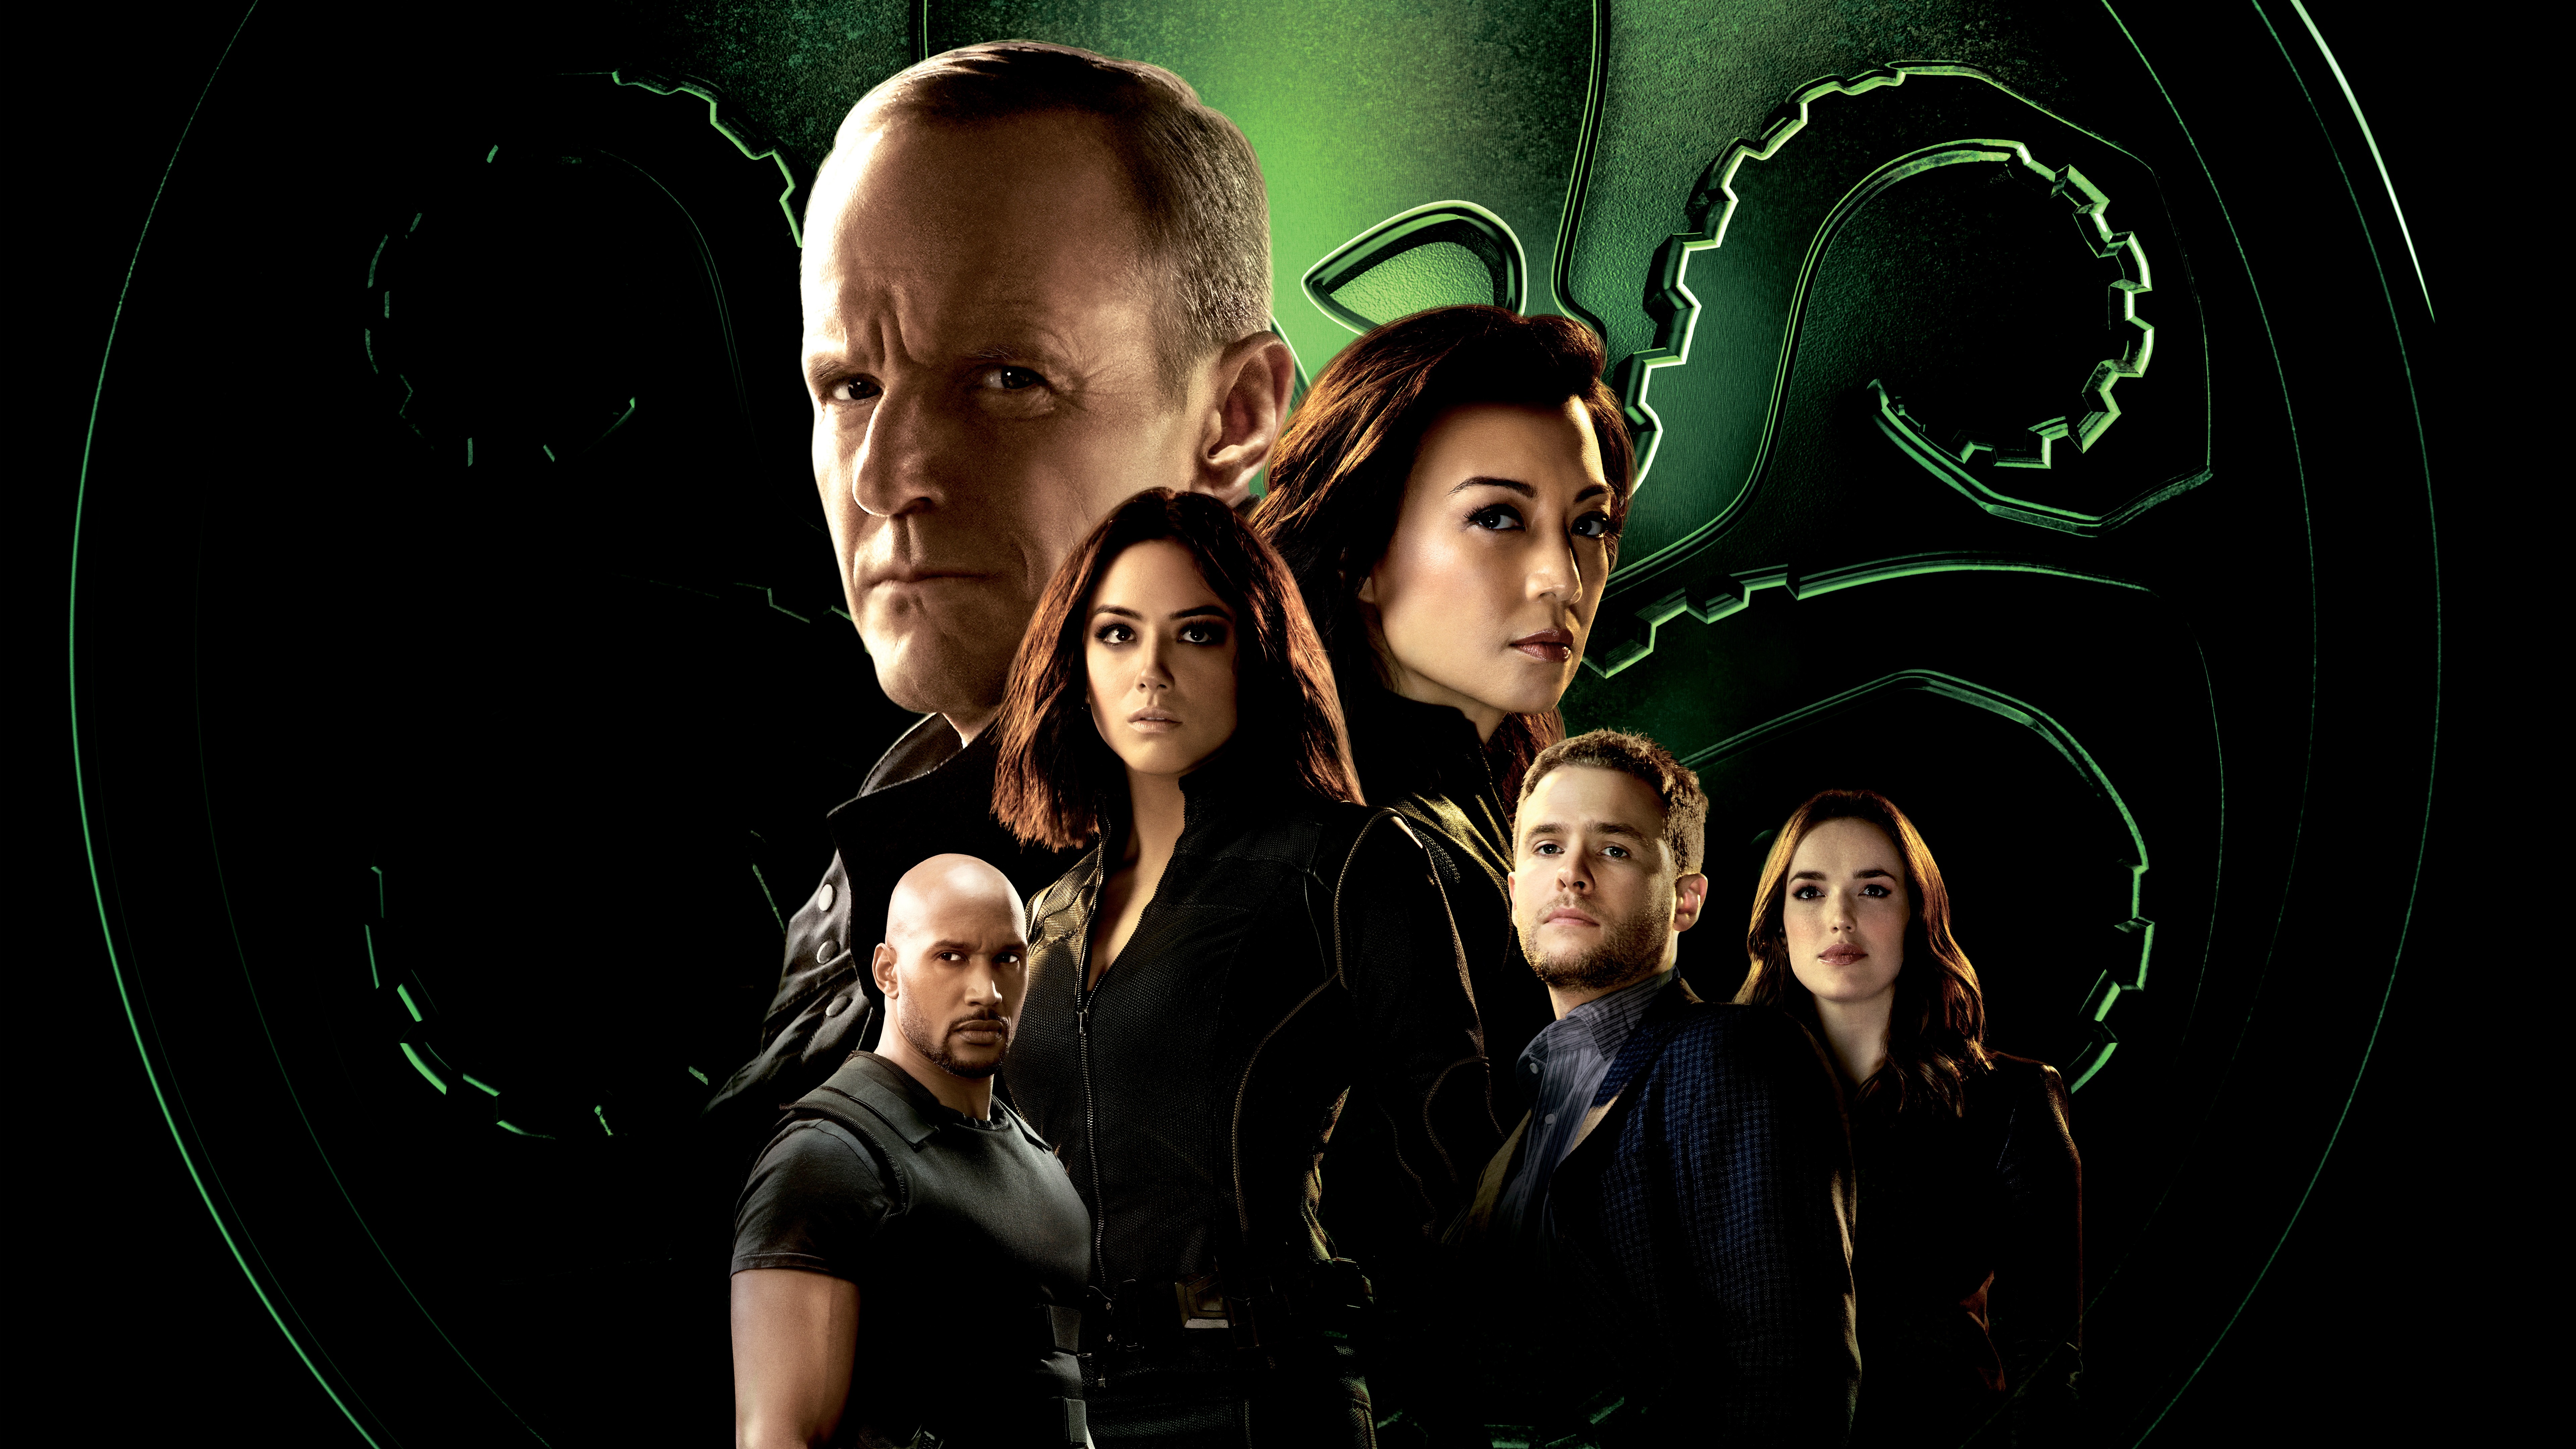 agents of shield wallpaper,photography,flash photography,movie,darkness,fictional character